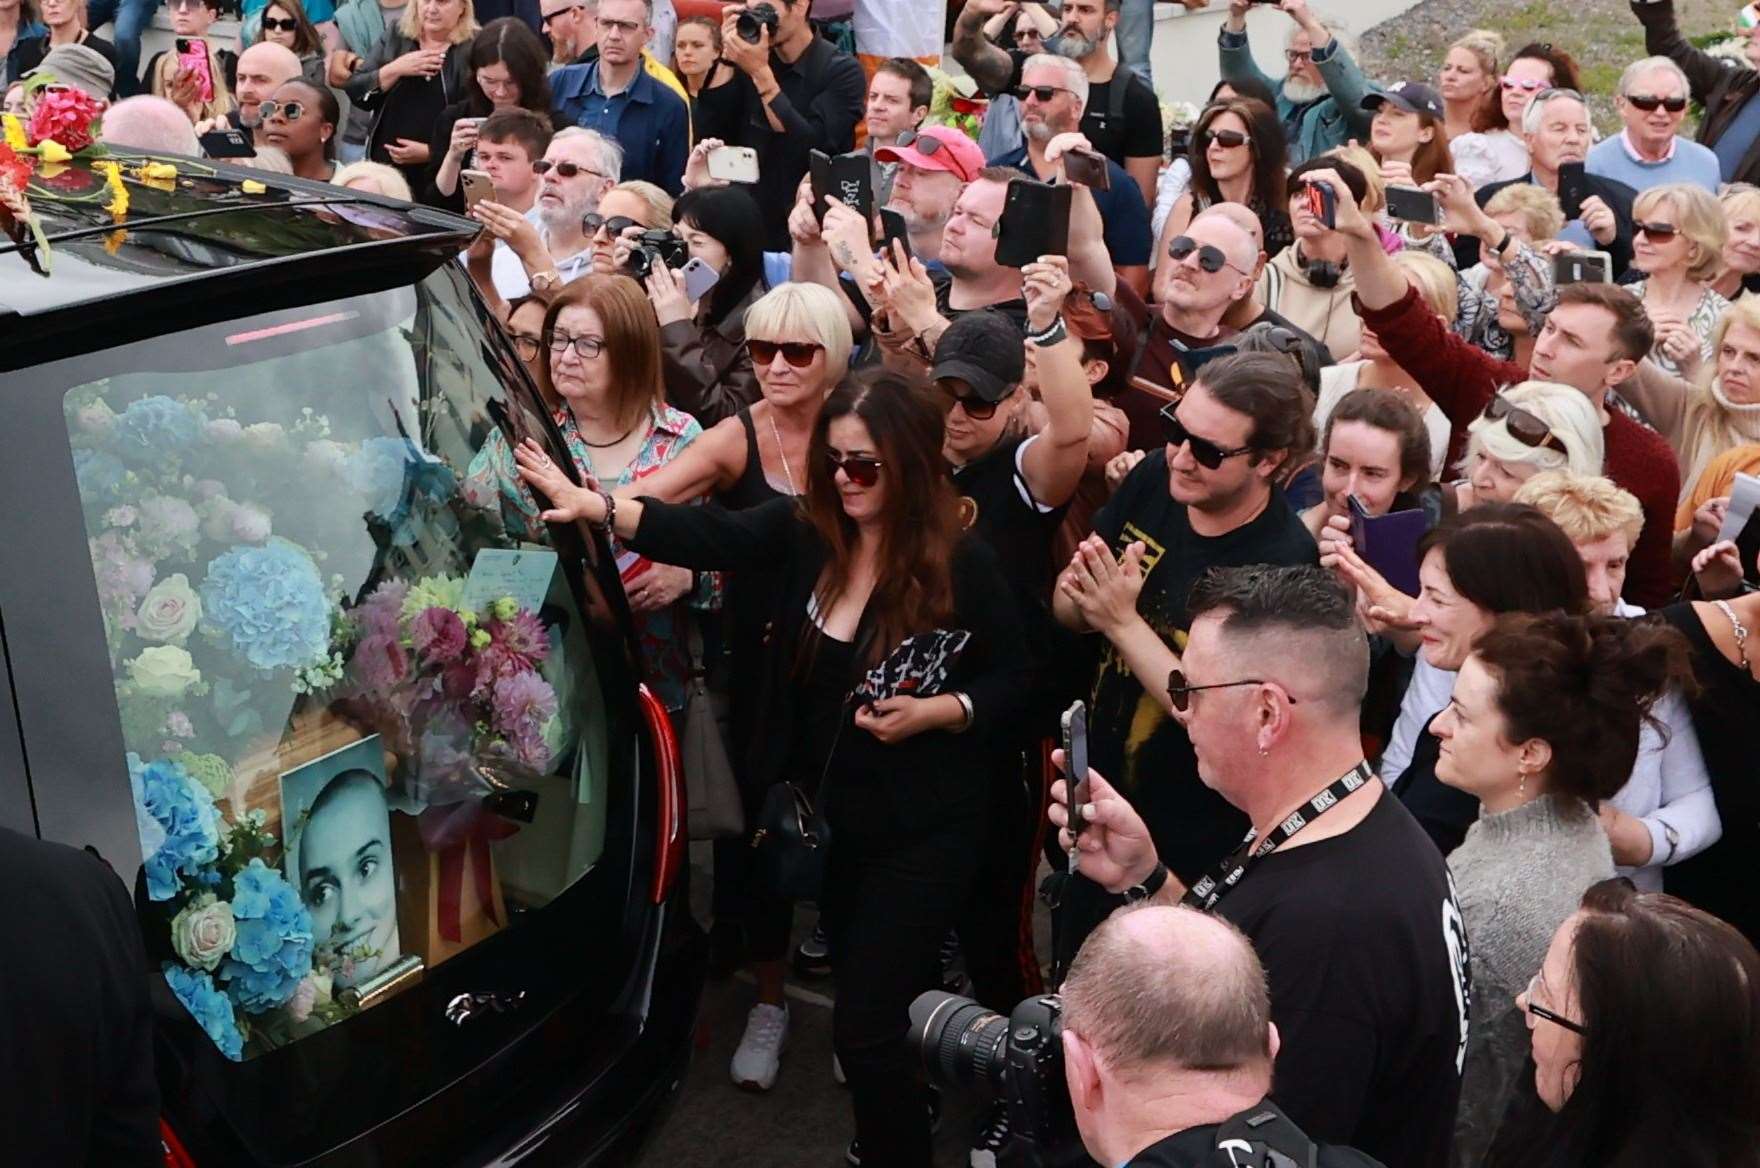 The singer’s funeral cortege passes through her former home town ahead of a private burial service (Liam McBurney/PA)